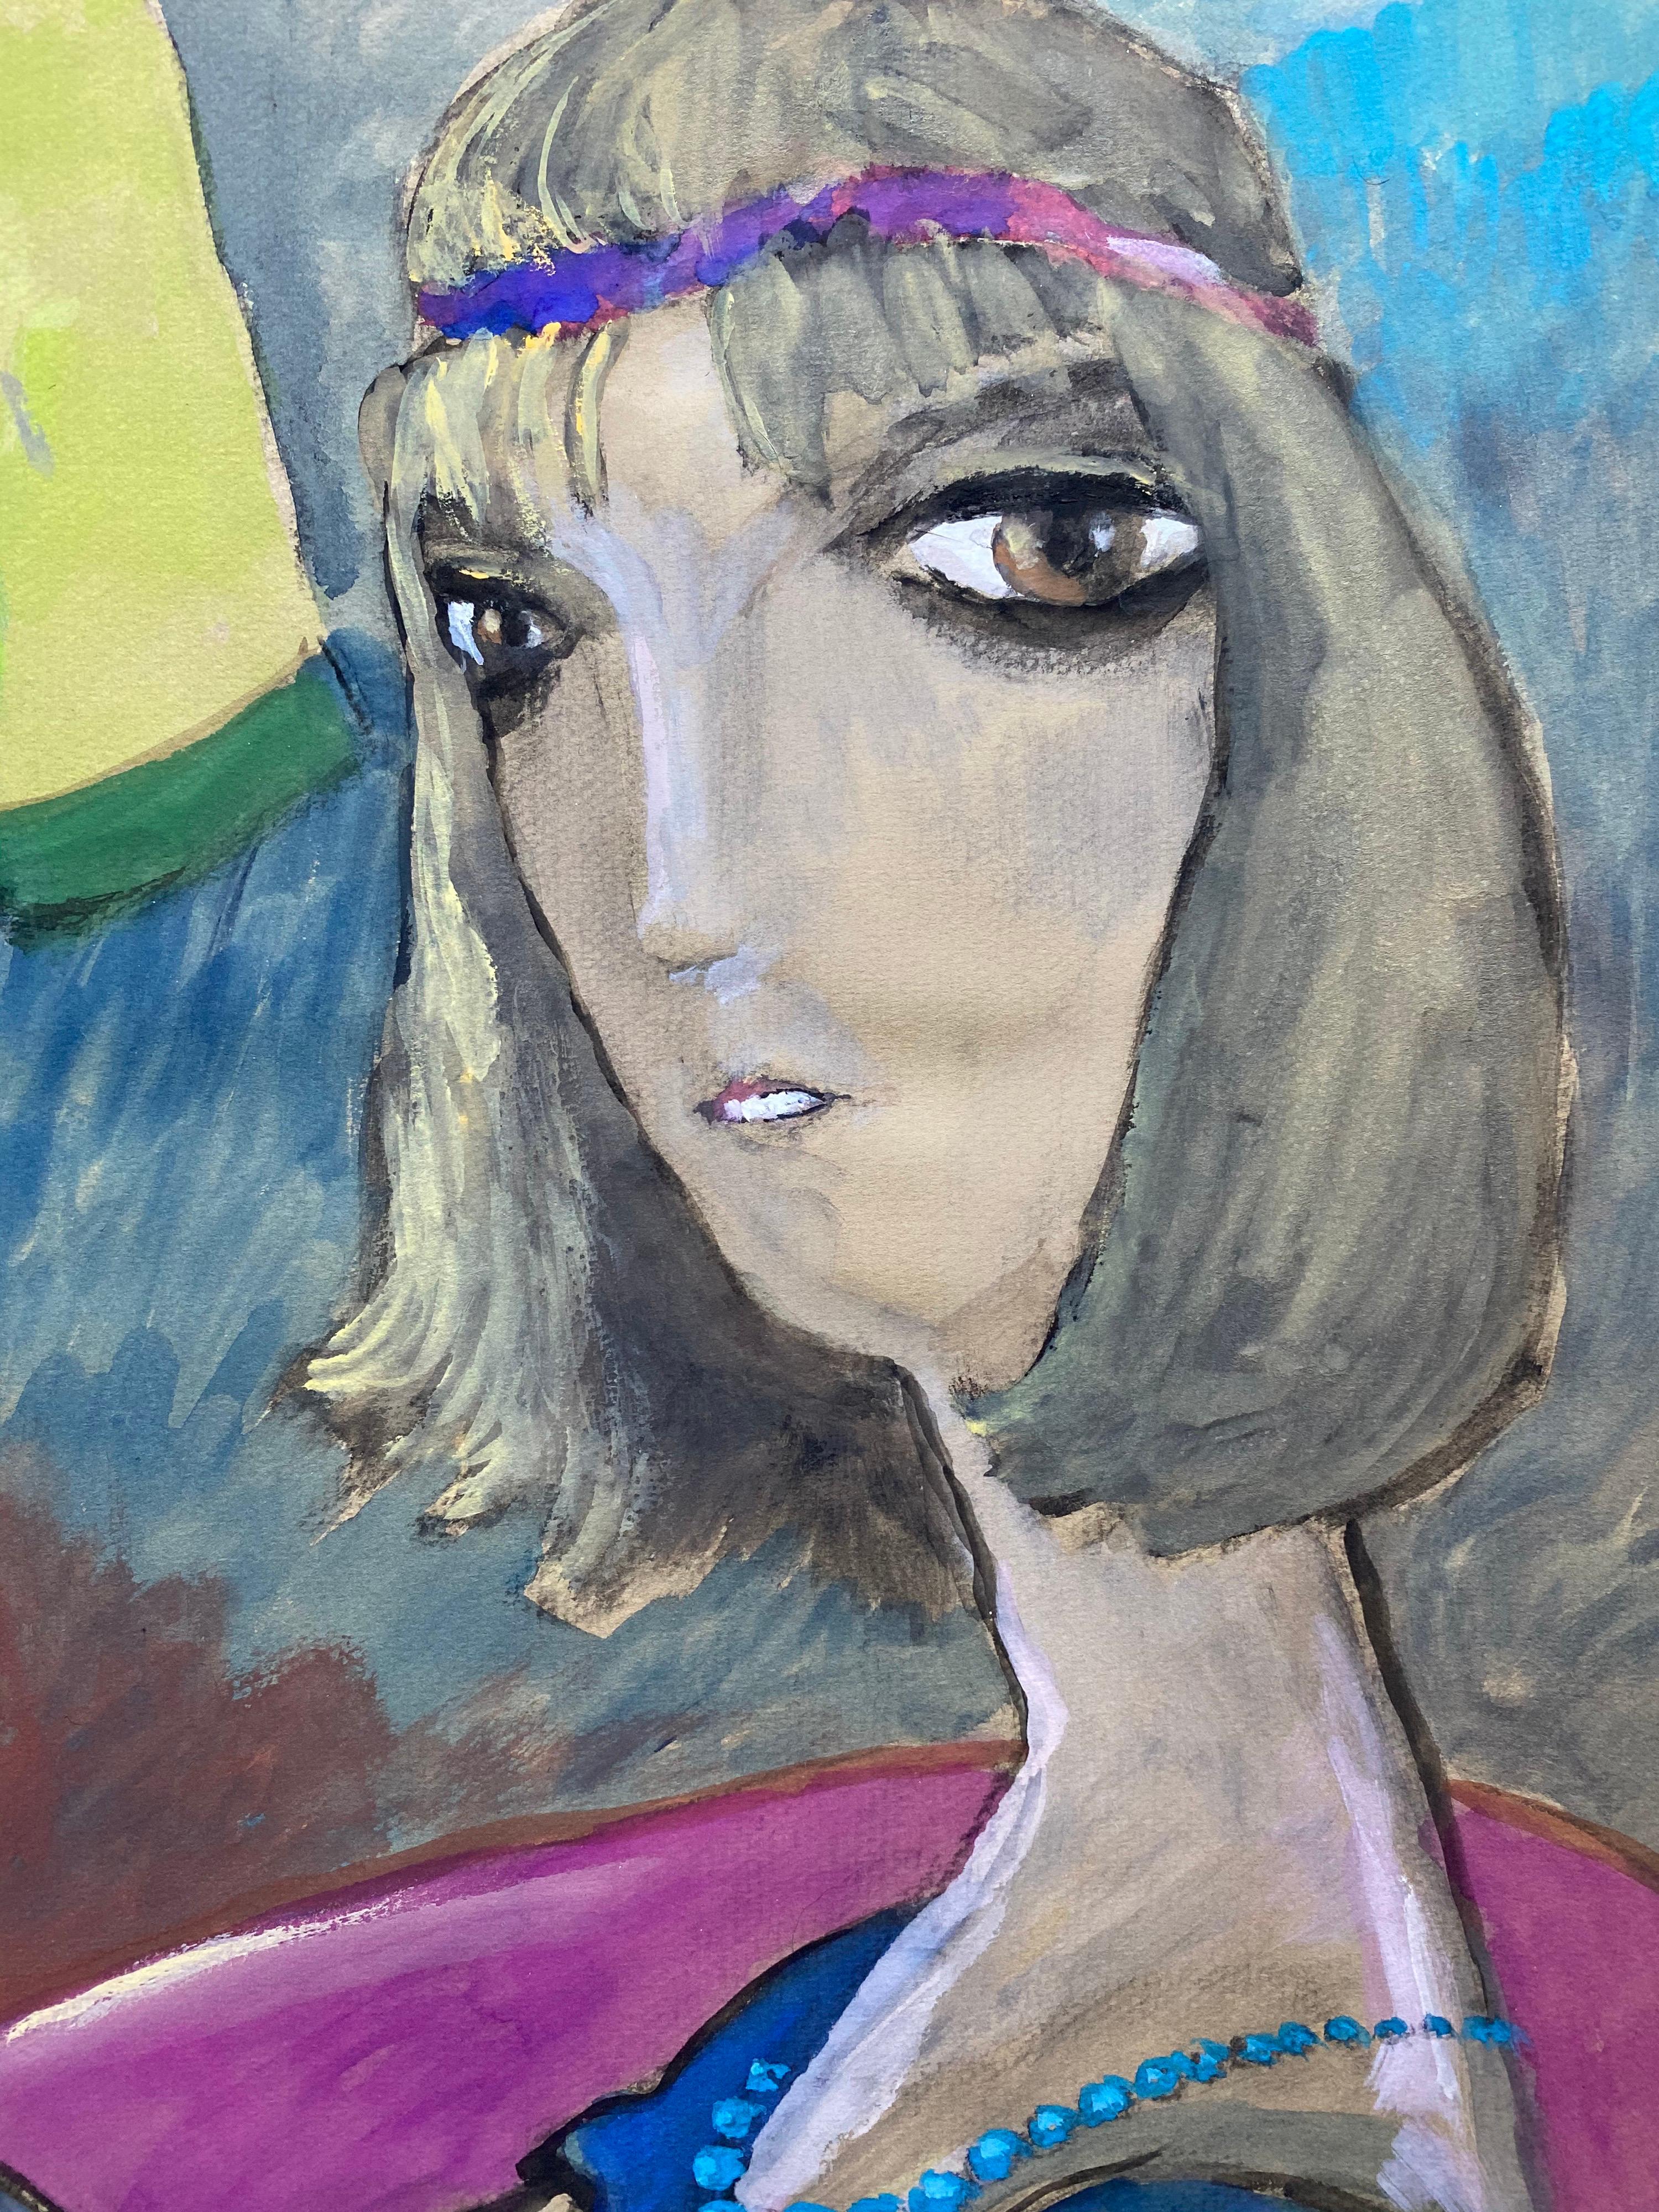 1960's French Portrait Caricature of Flapper Girl